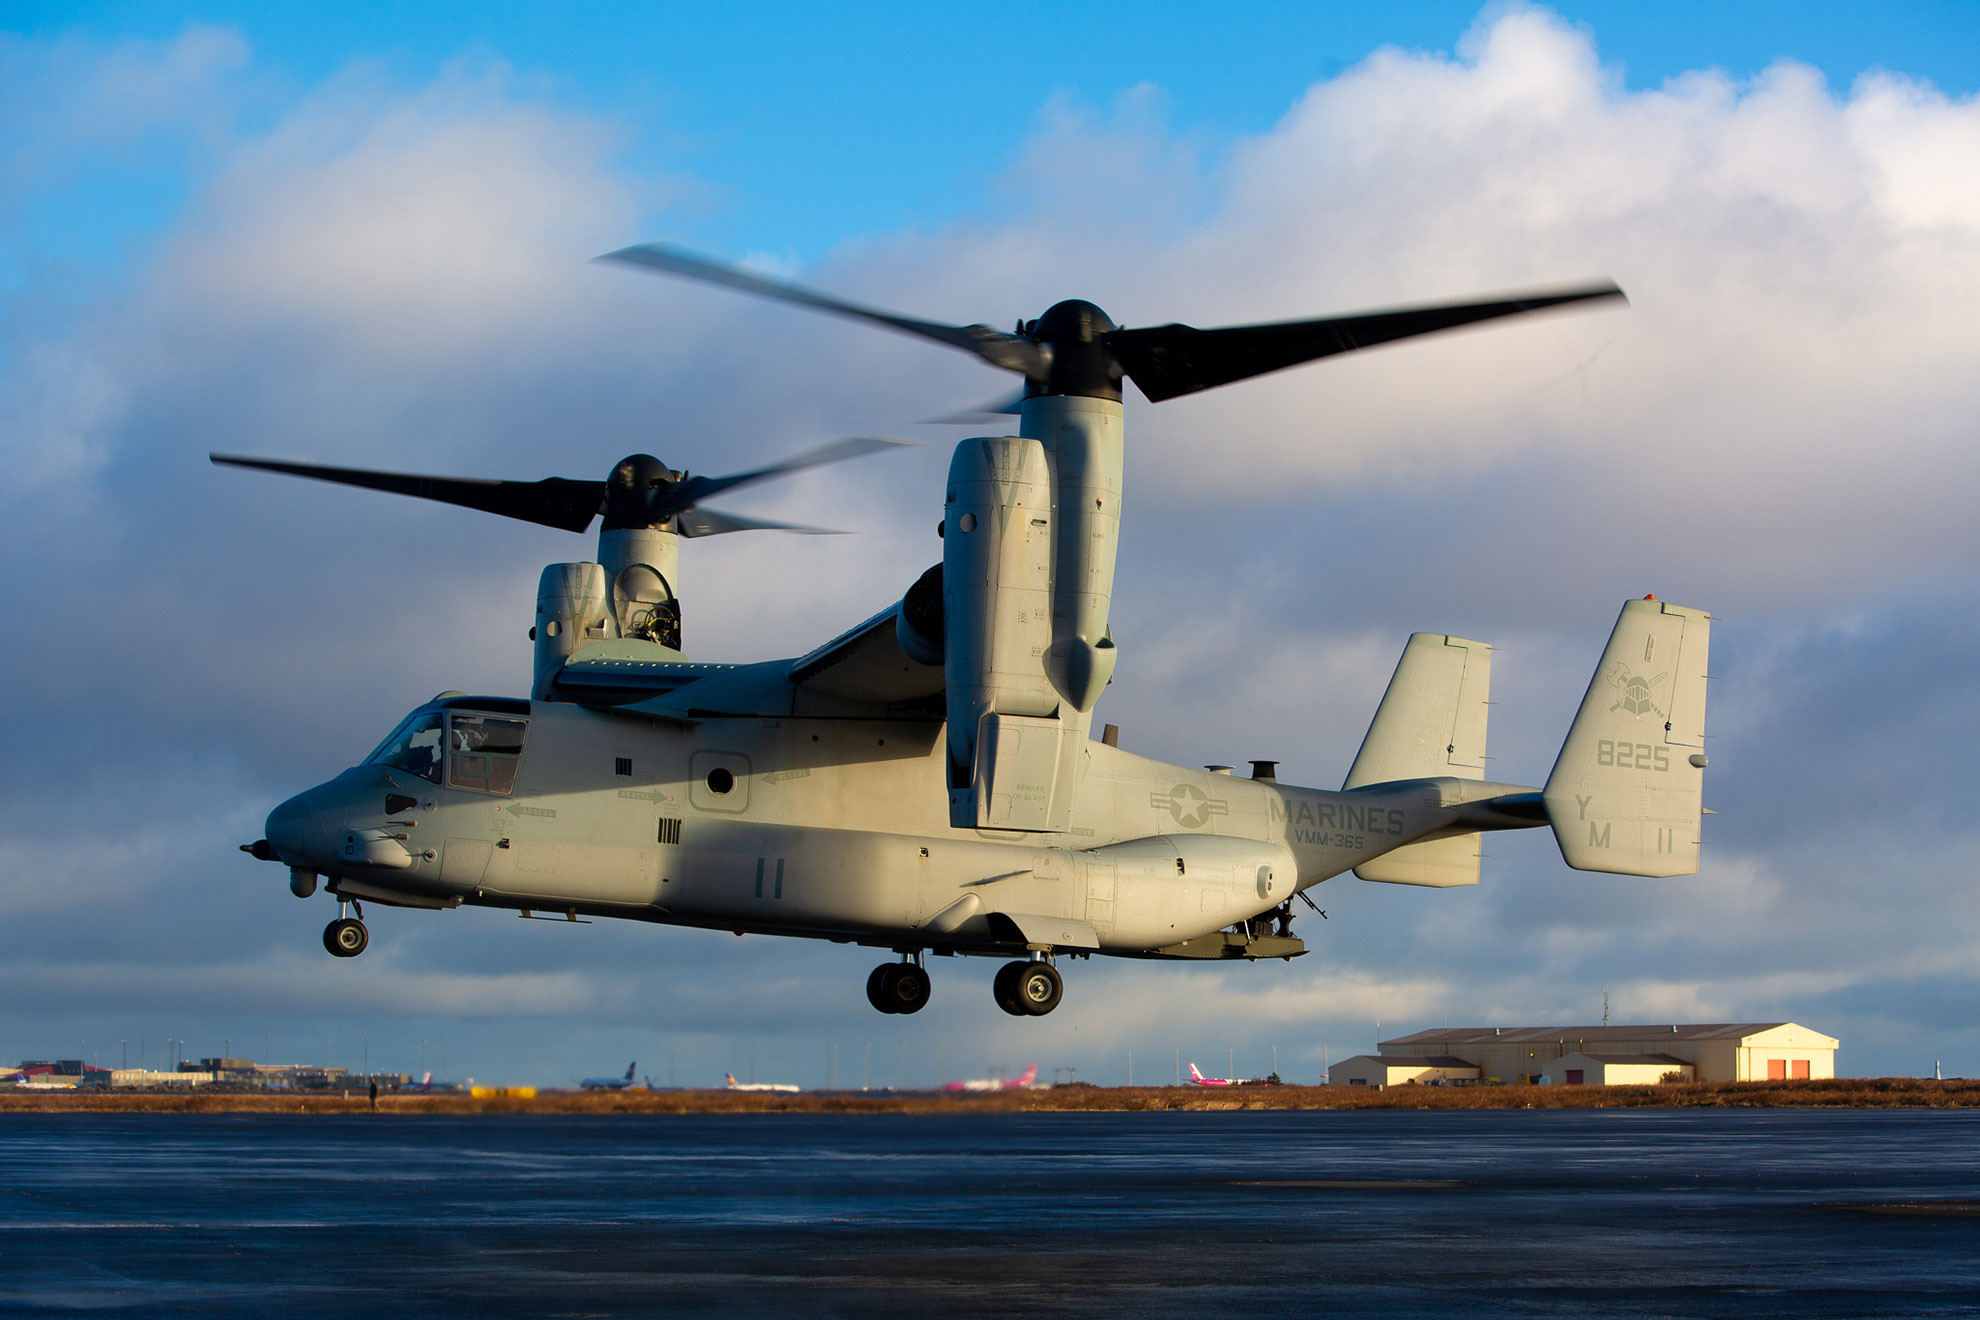 Keflavik, Iceland (Oct. 17, 2018) A MV-22 Osprey with 24th Marine Expeditionary Unit (MEU) lands on the runway at Keflavik Air Base in Iceland, Oct. 17, 2018, during Exercise Trident Juncture 18. Trident Juncture training in Iceland promotes key elements of preparing Marines to conduct follow-on training in Norway in the later part of the exercise -- U.S. Marine Corps photo by Lance Cpl. Menelik Collins. -